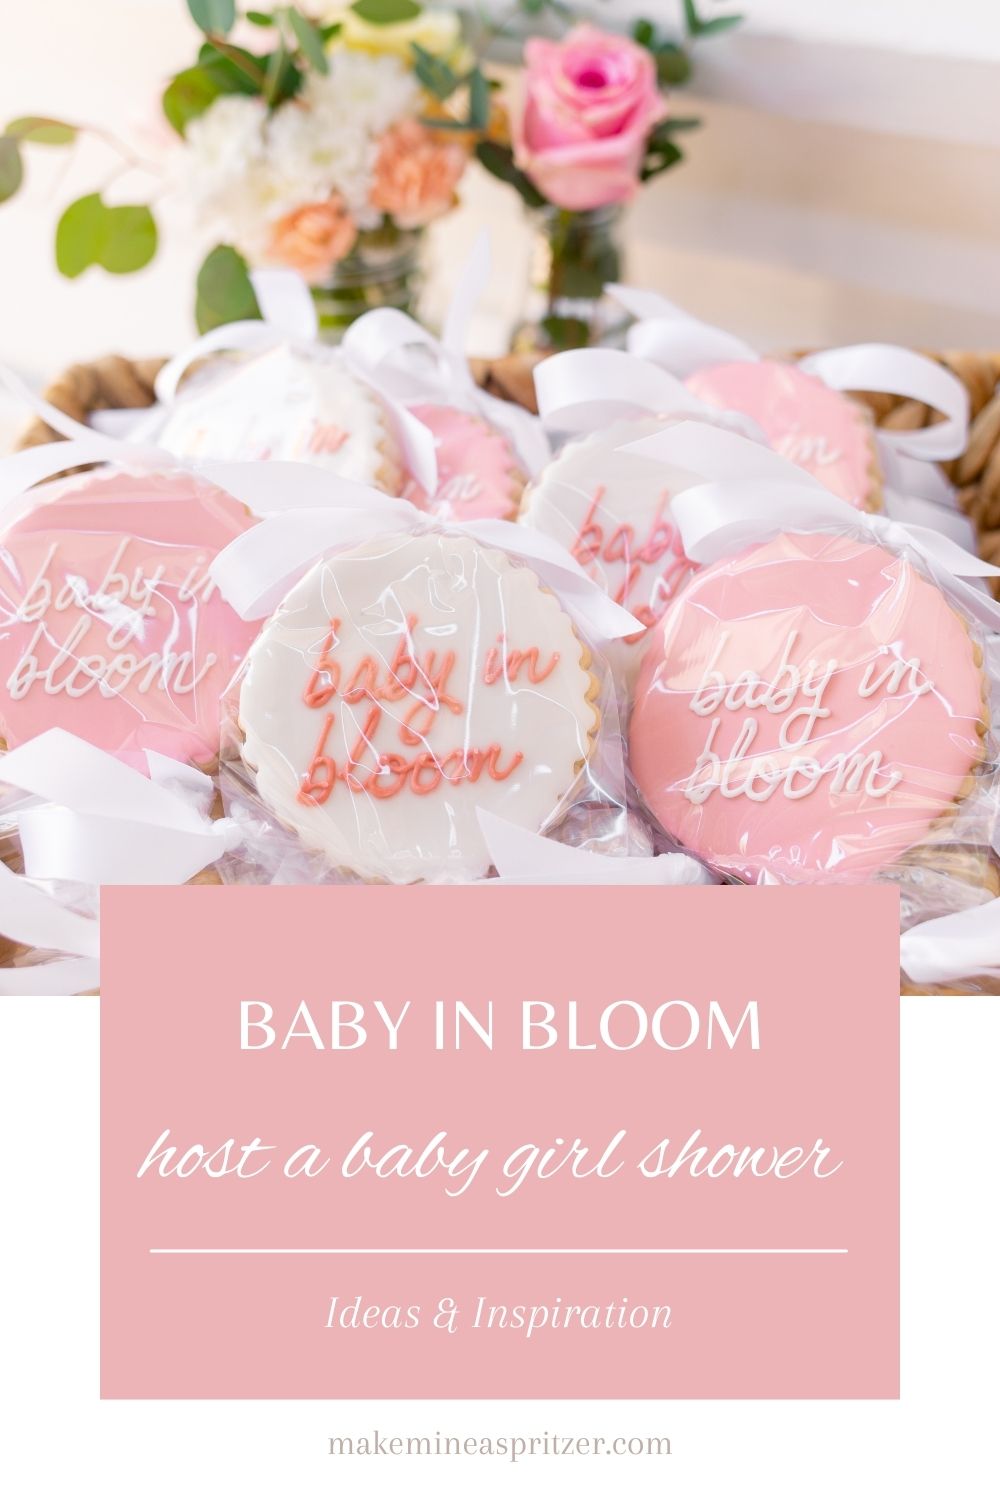 Host a baby girl shower collage.